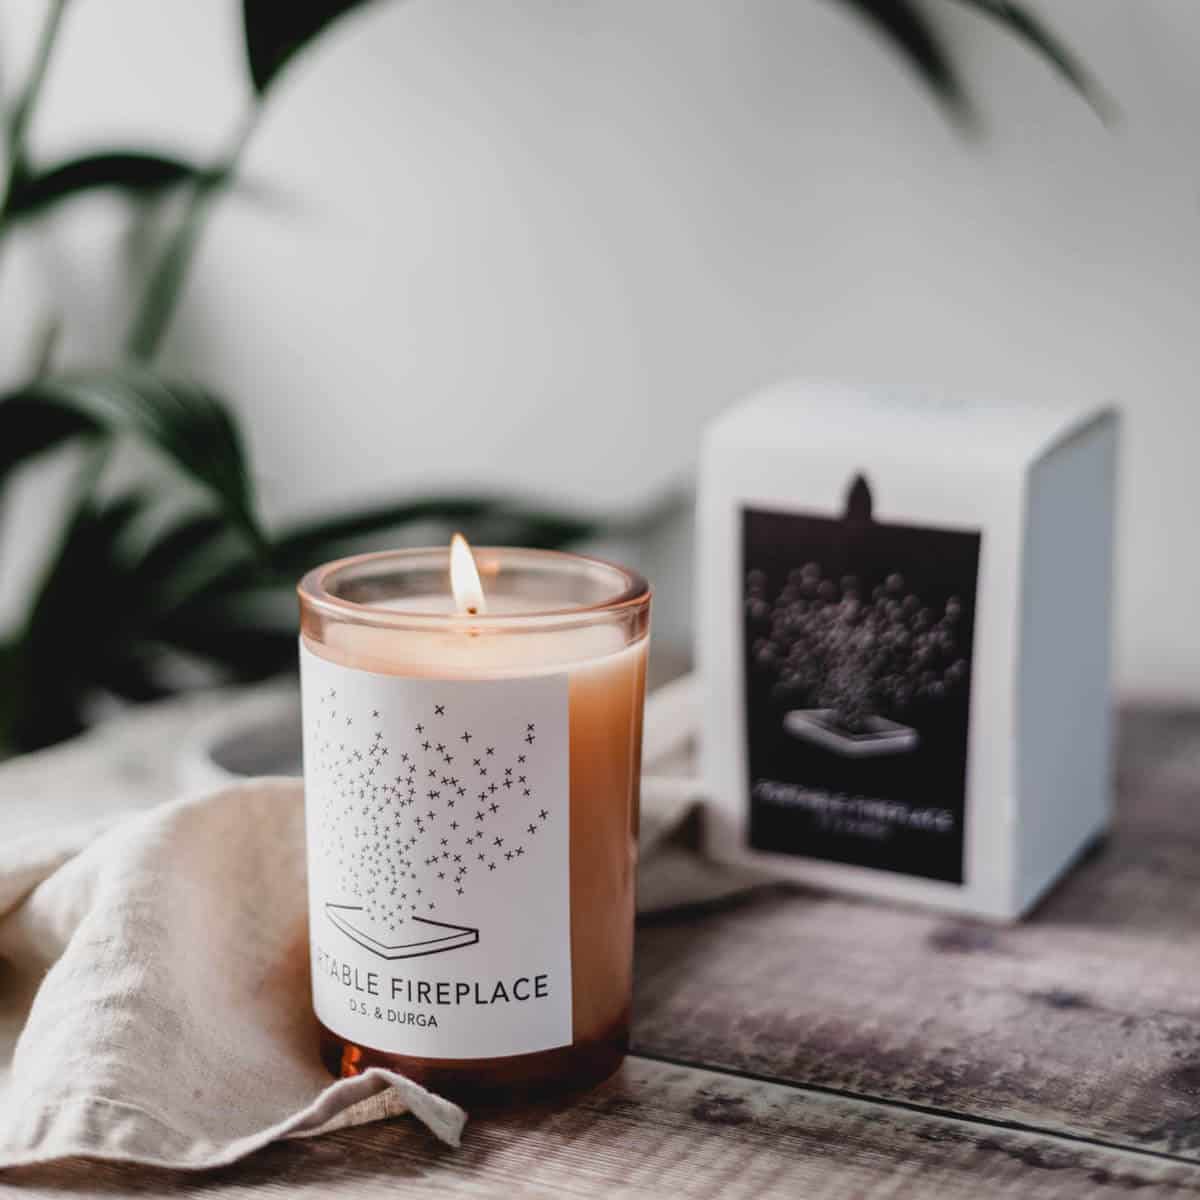 Portable Fireplace Scented Candle by D.S. & DURGA